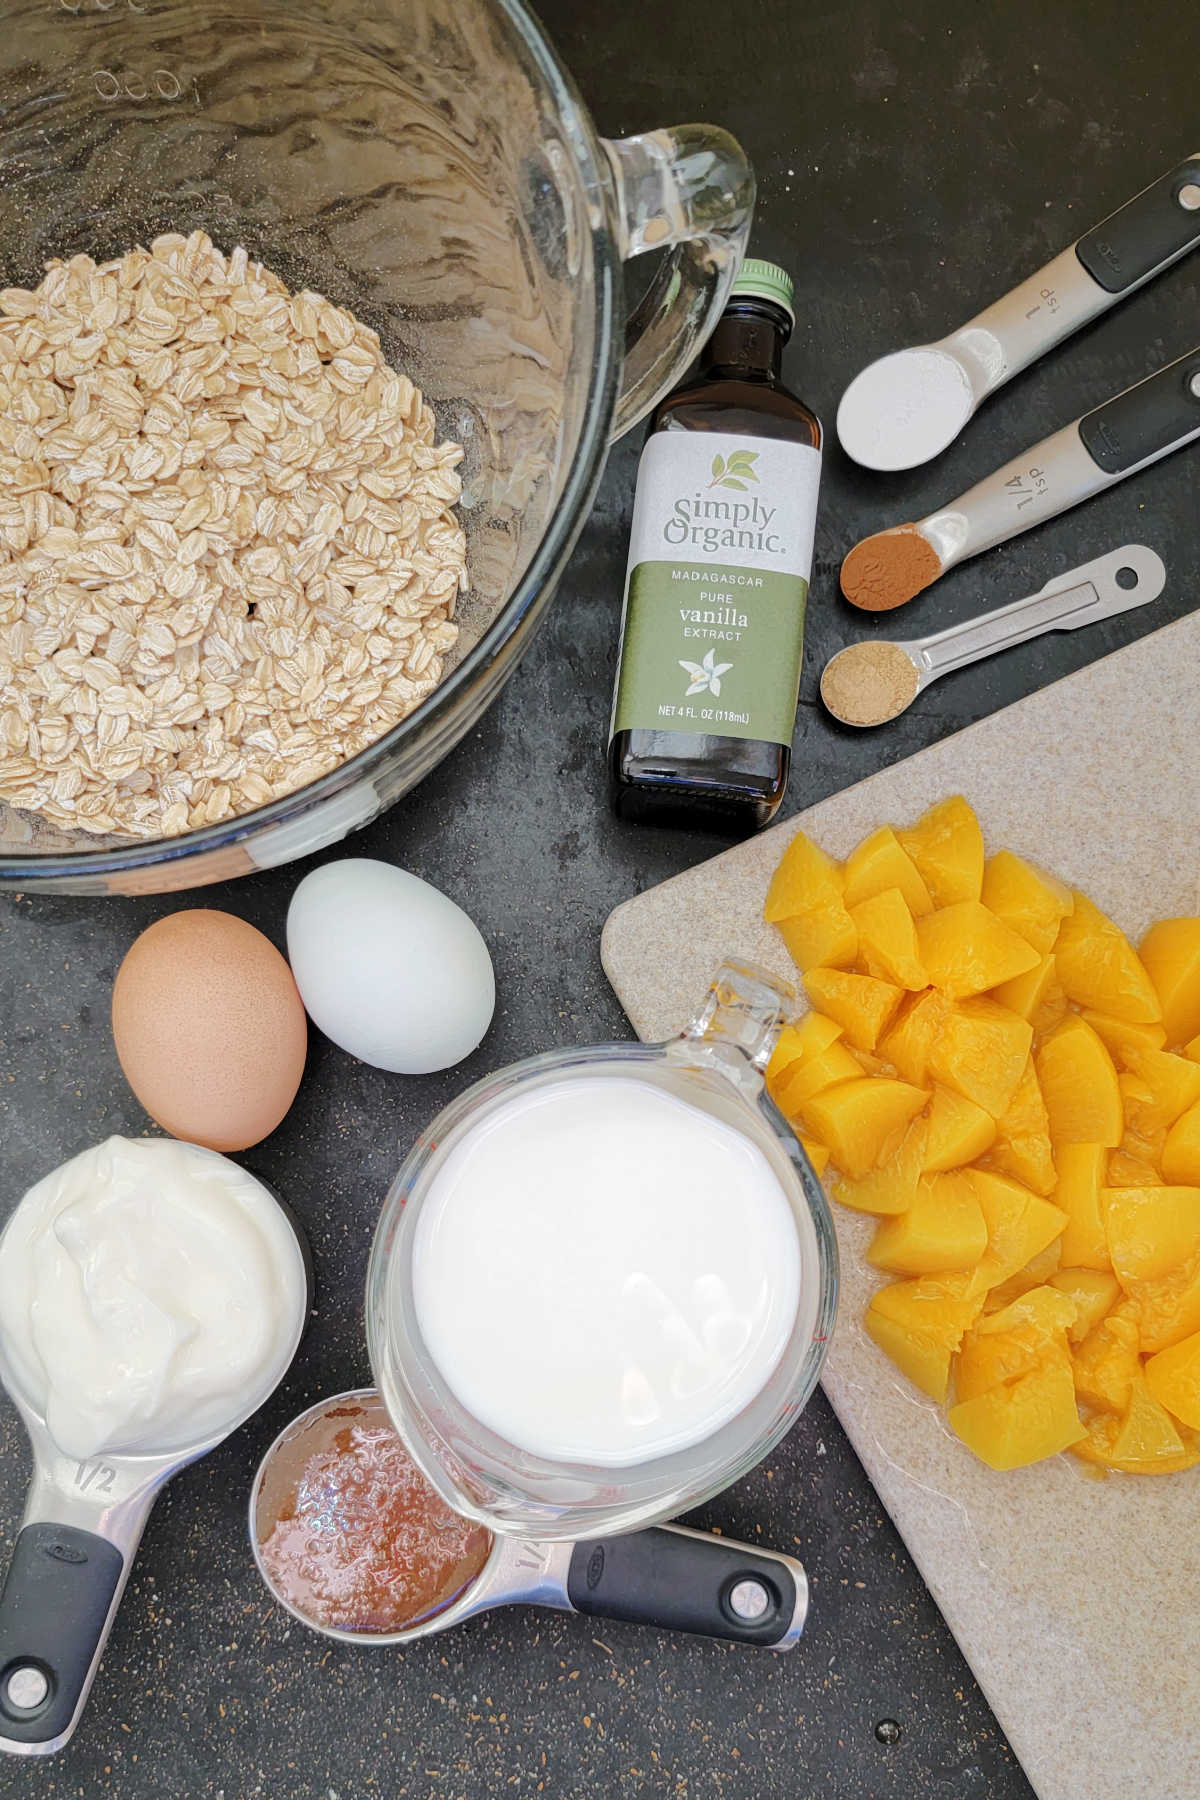 Ingredients ready to be made into peach baked oats.